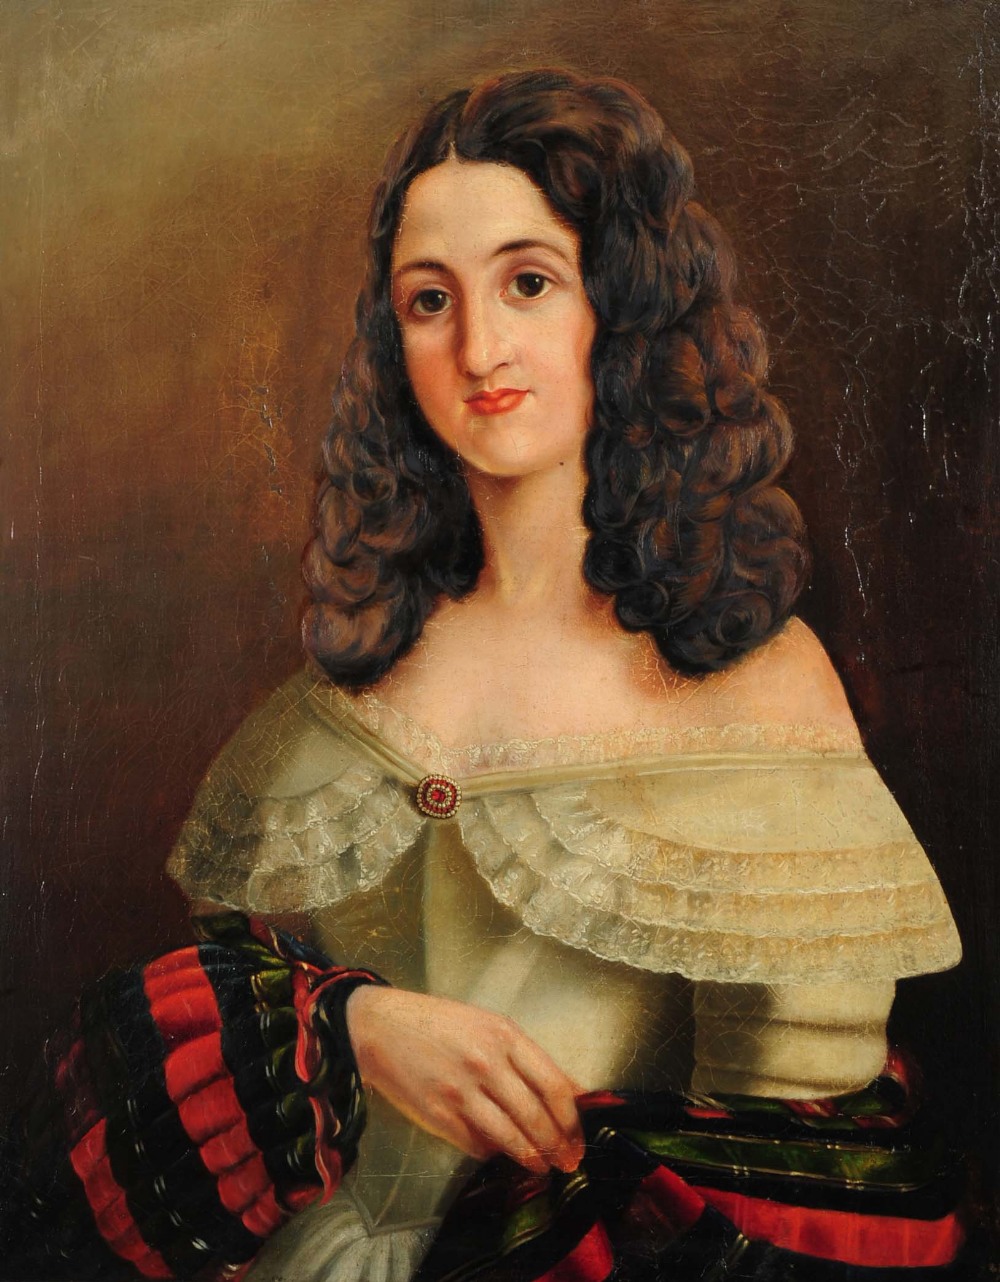 19TH CENTURY SCOTTISH SCHOOL Portrait of a lady with long brown curly hair, wearing dress